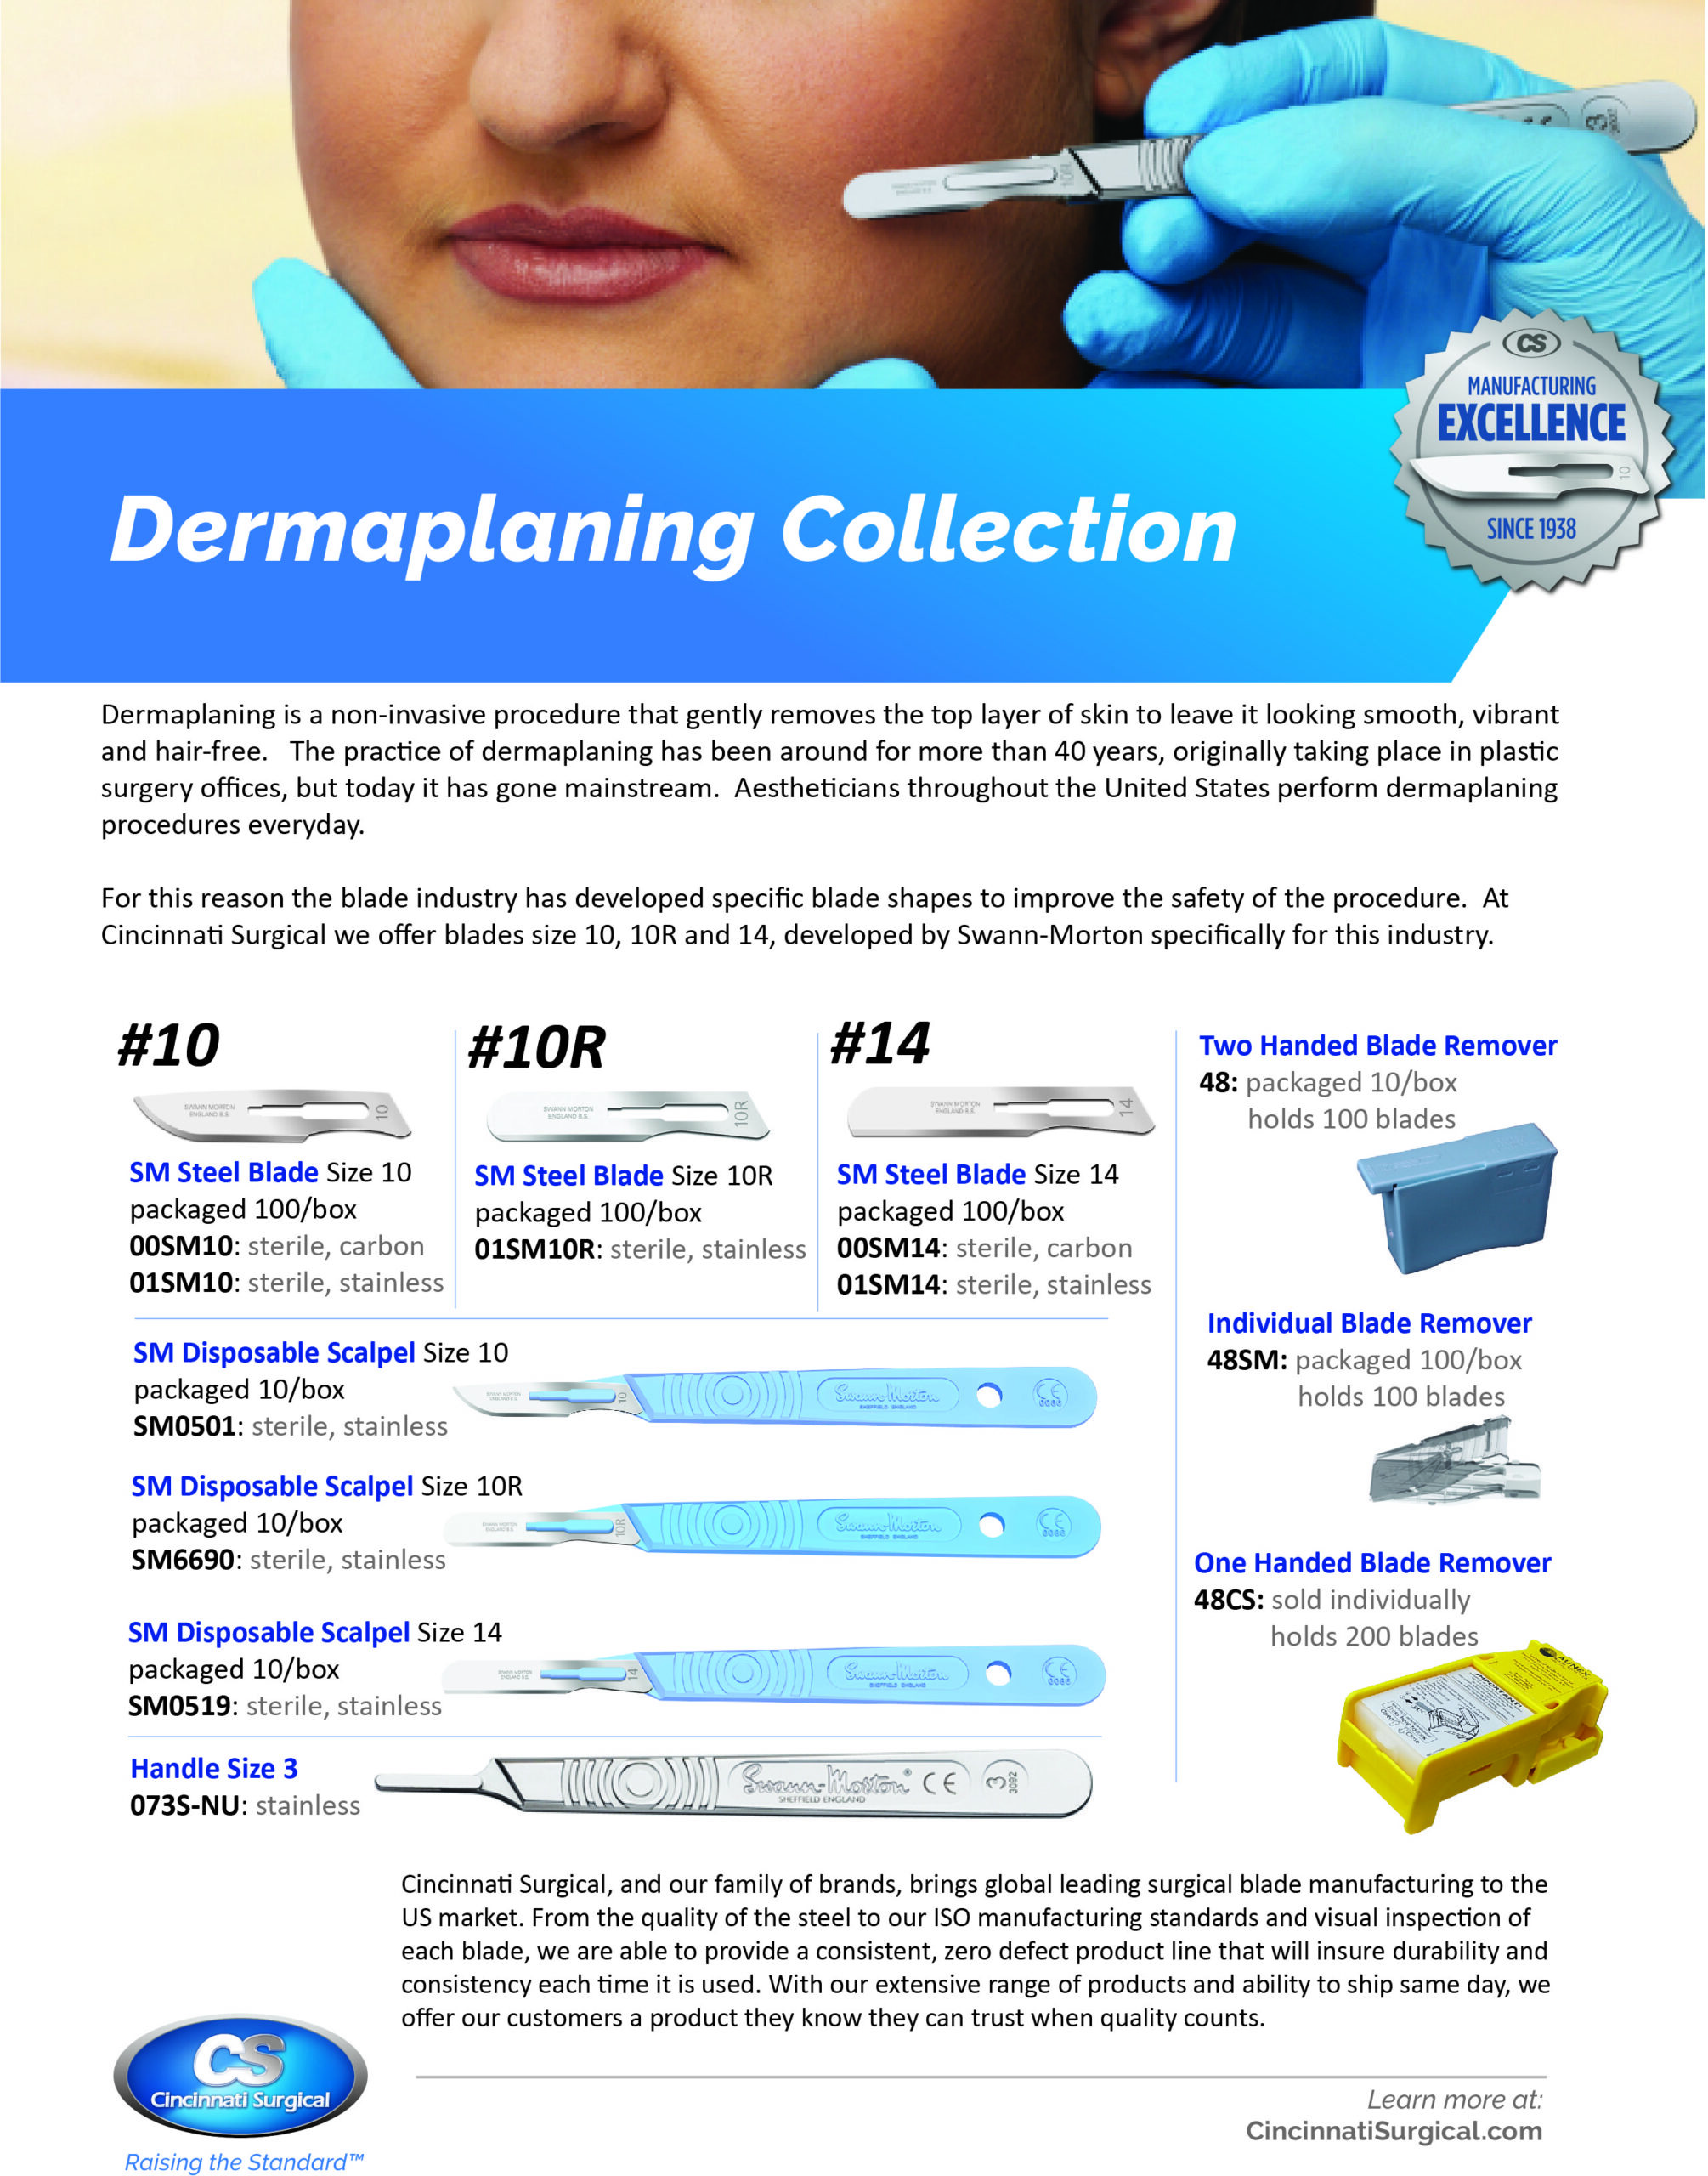 Dermaplaning Collection